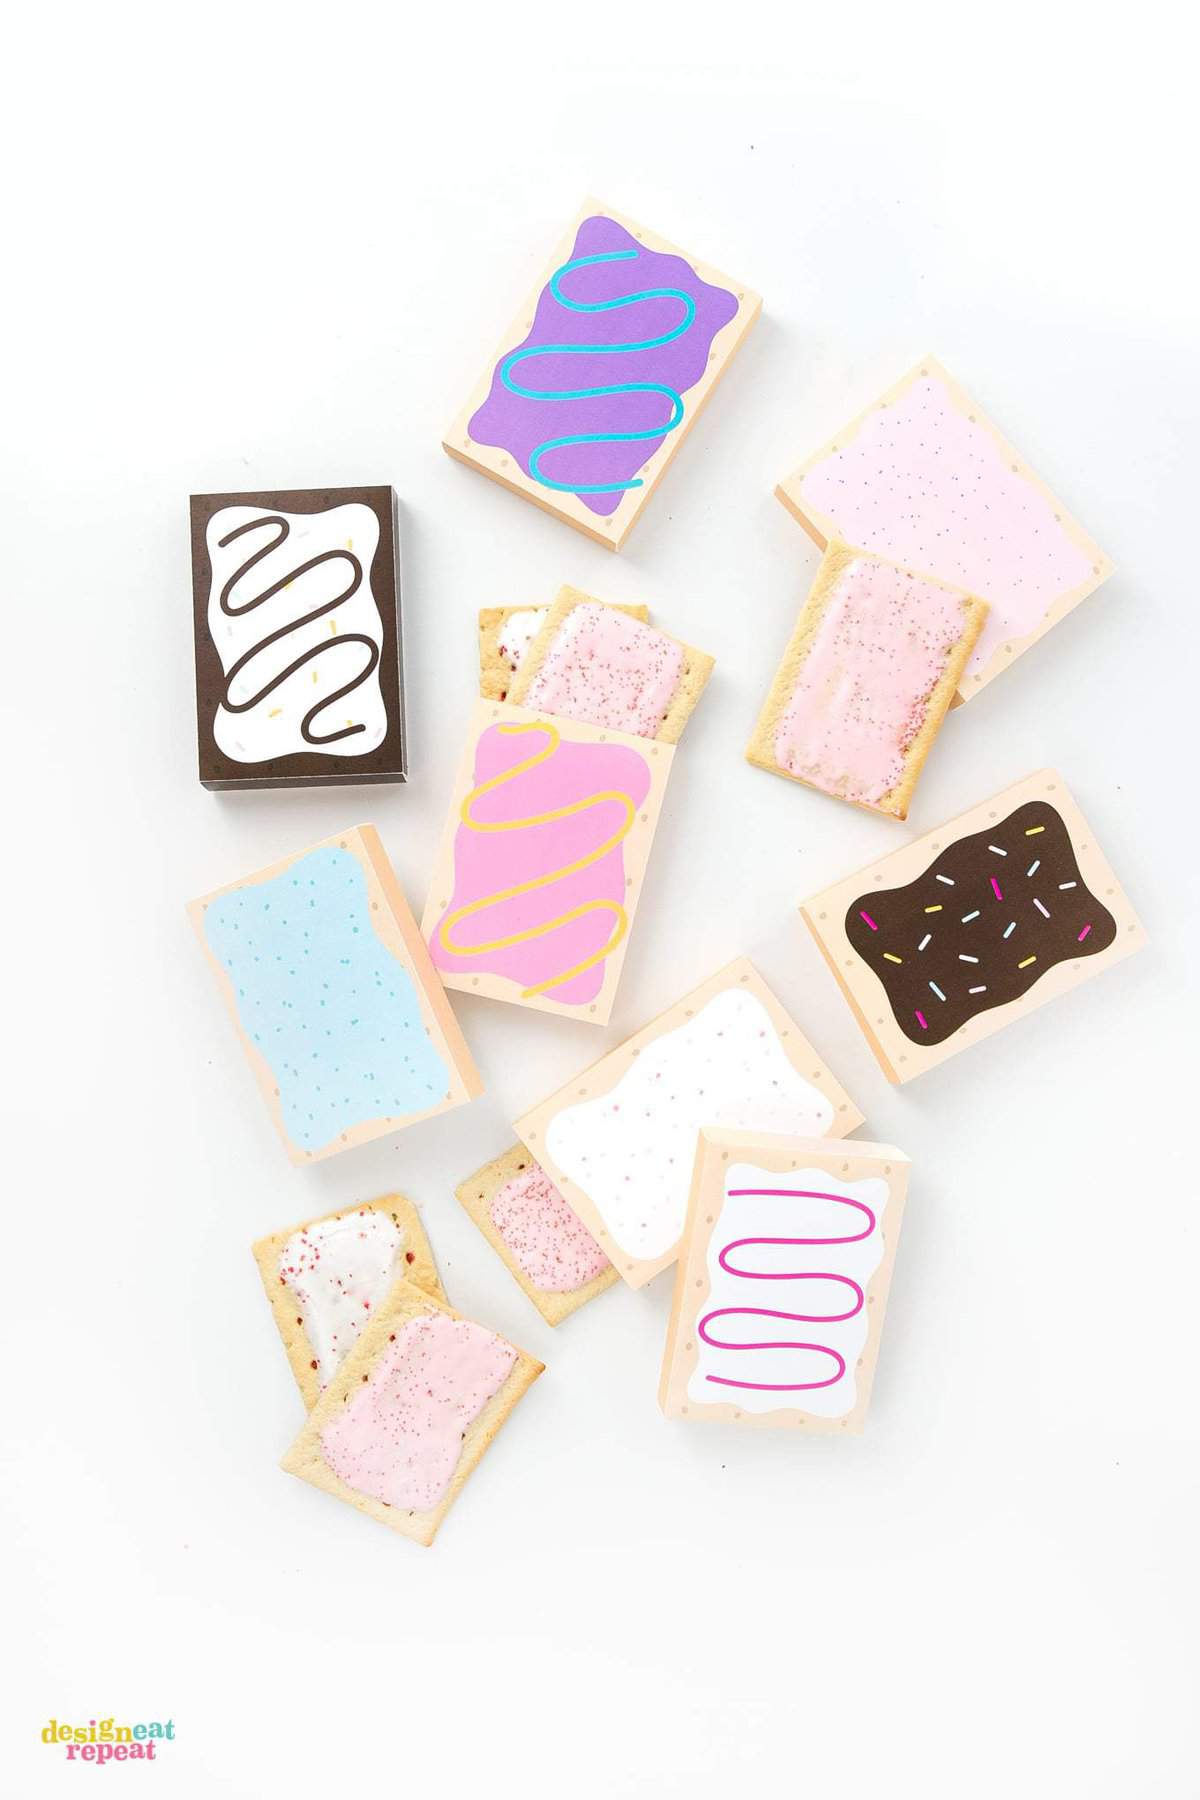 How fun are these?! Printable POP-TART treat boxes! With 8 delectable designs, these gift box templates are sure to please your party goers with their flavor of choice! Download at DesignEatRepeat.com | #printable #silhouette